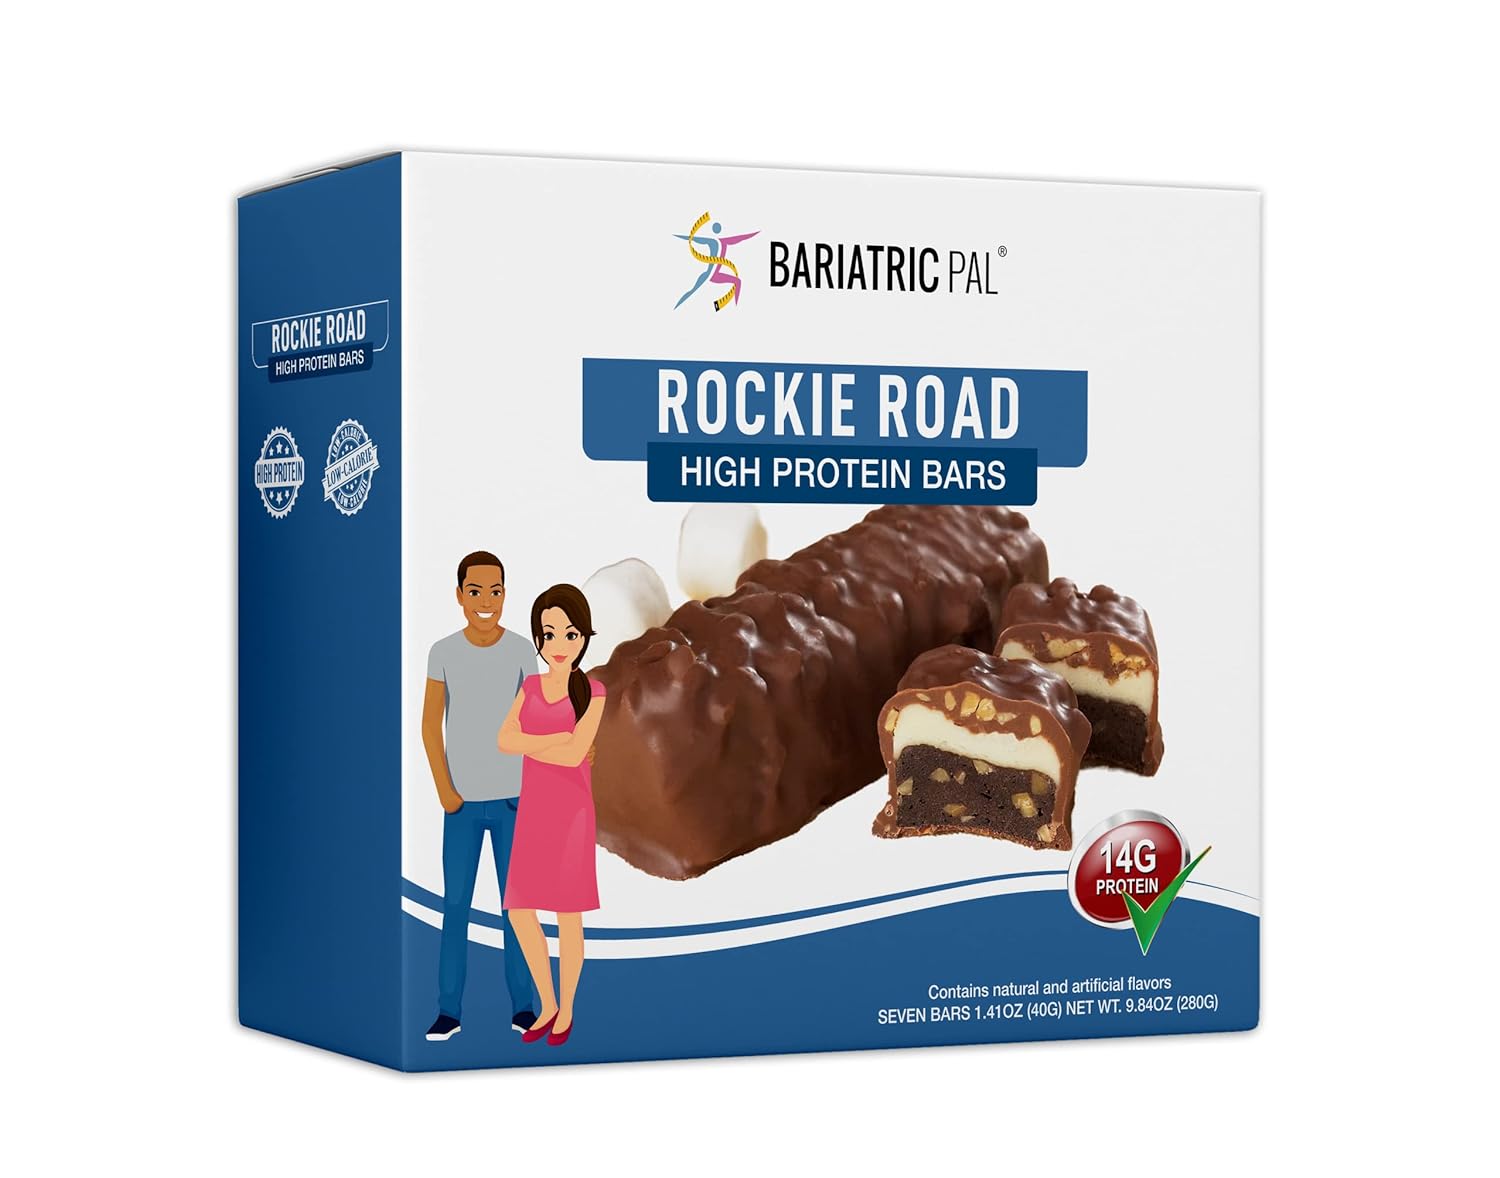 BariatricPal 14g Protein Bars - Rockie Road (1-Pack)